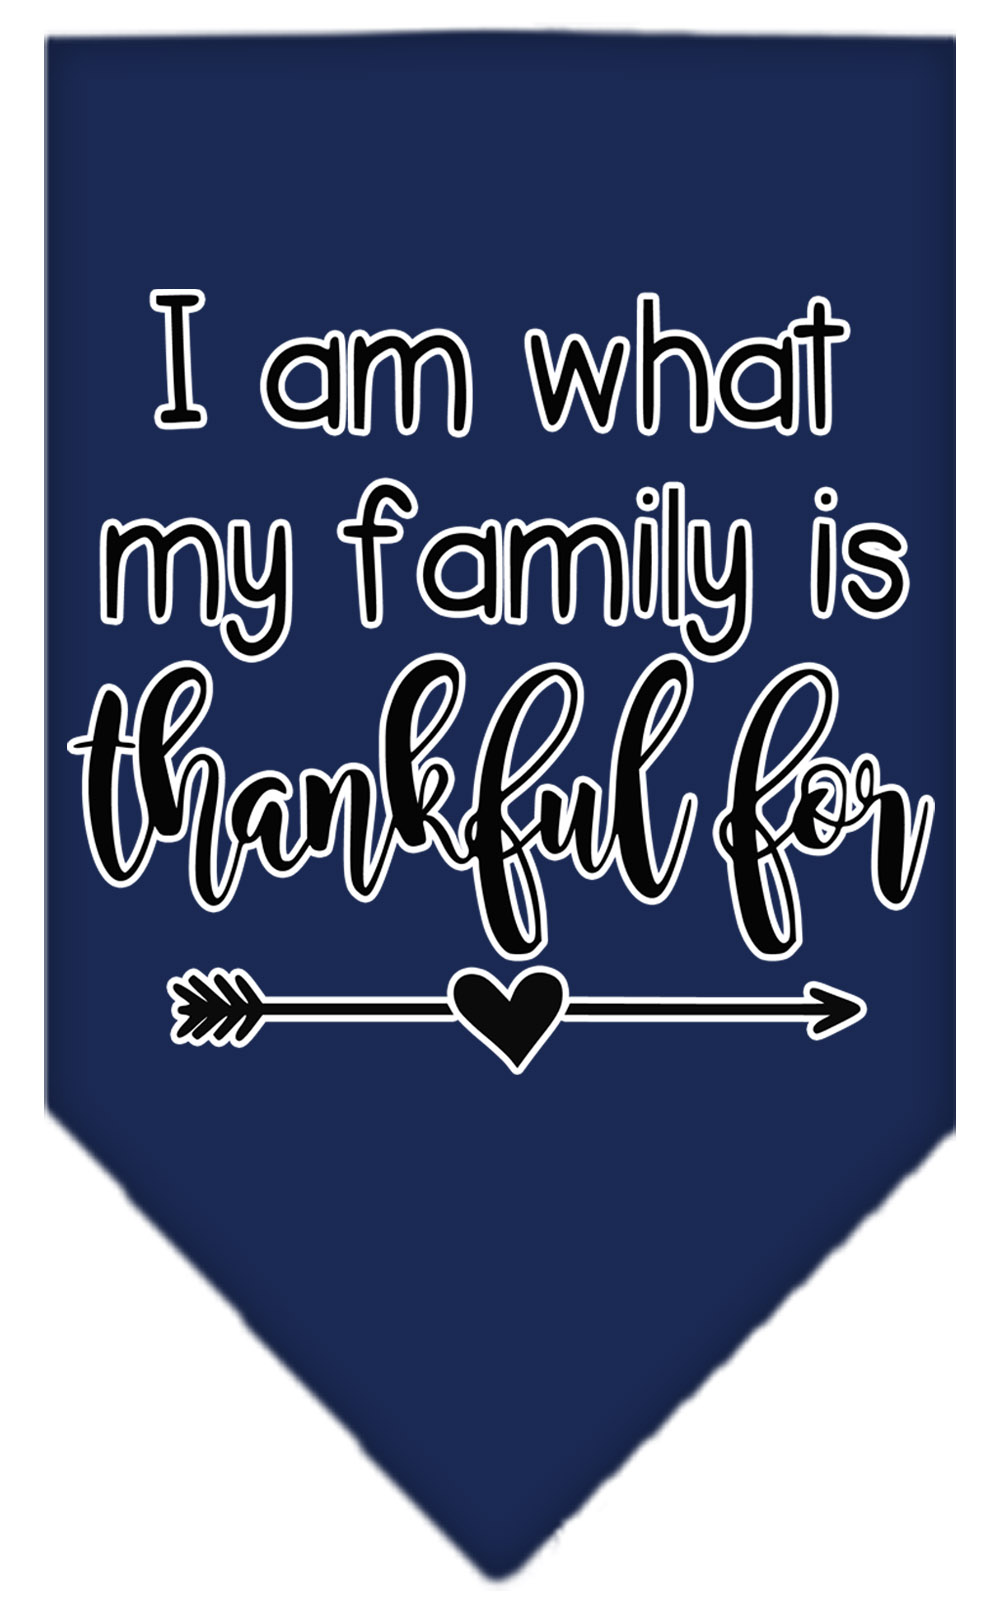 I Am What My Family is Thankful For Screen Print Bandana Navy Blue Small